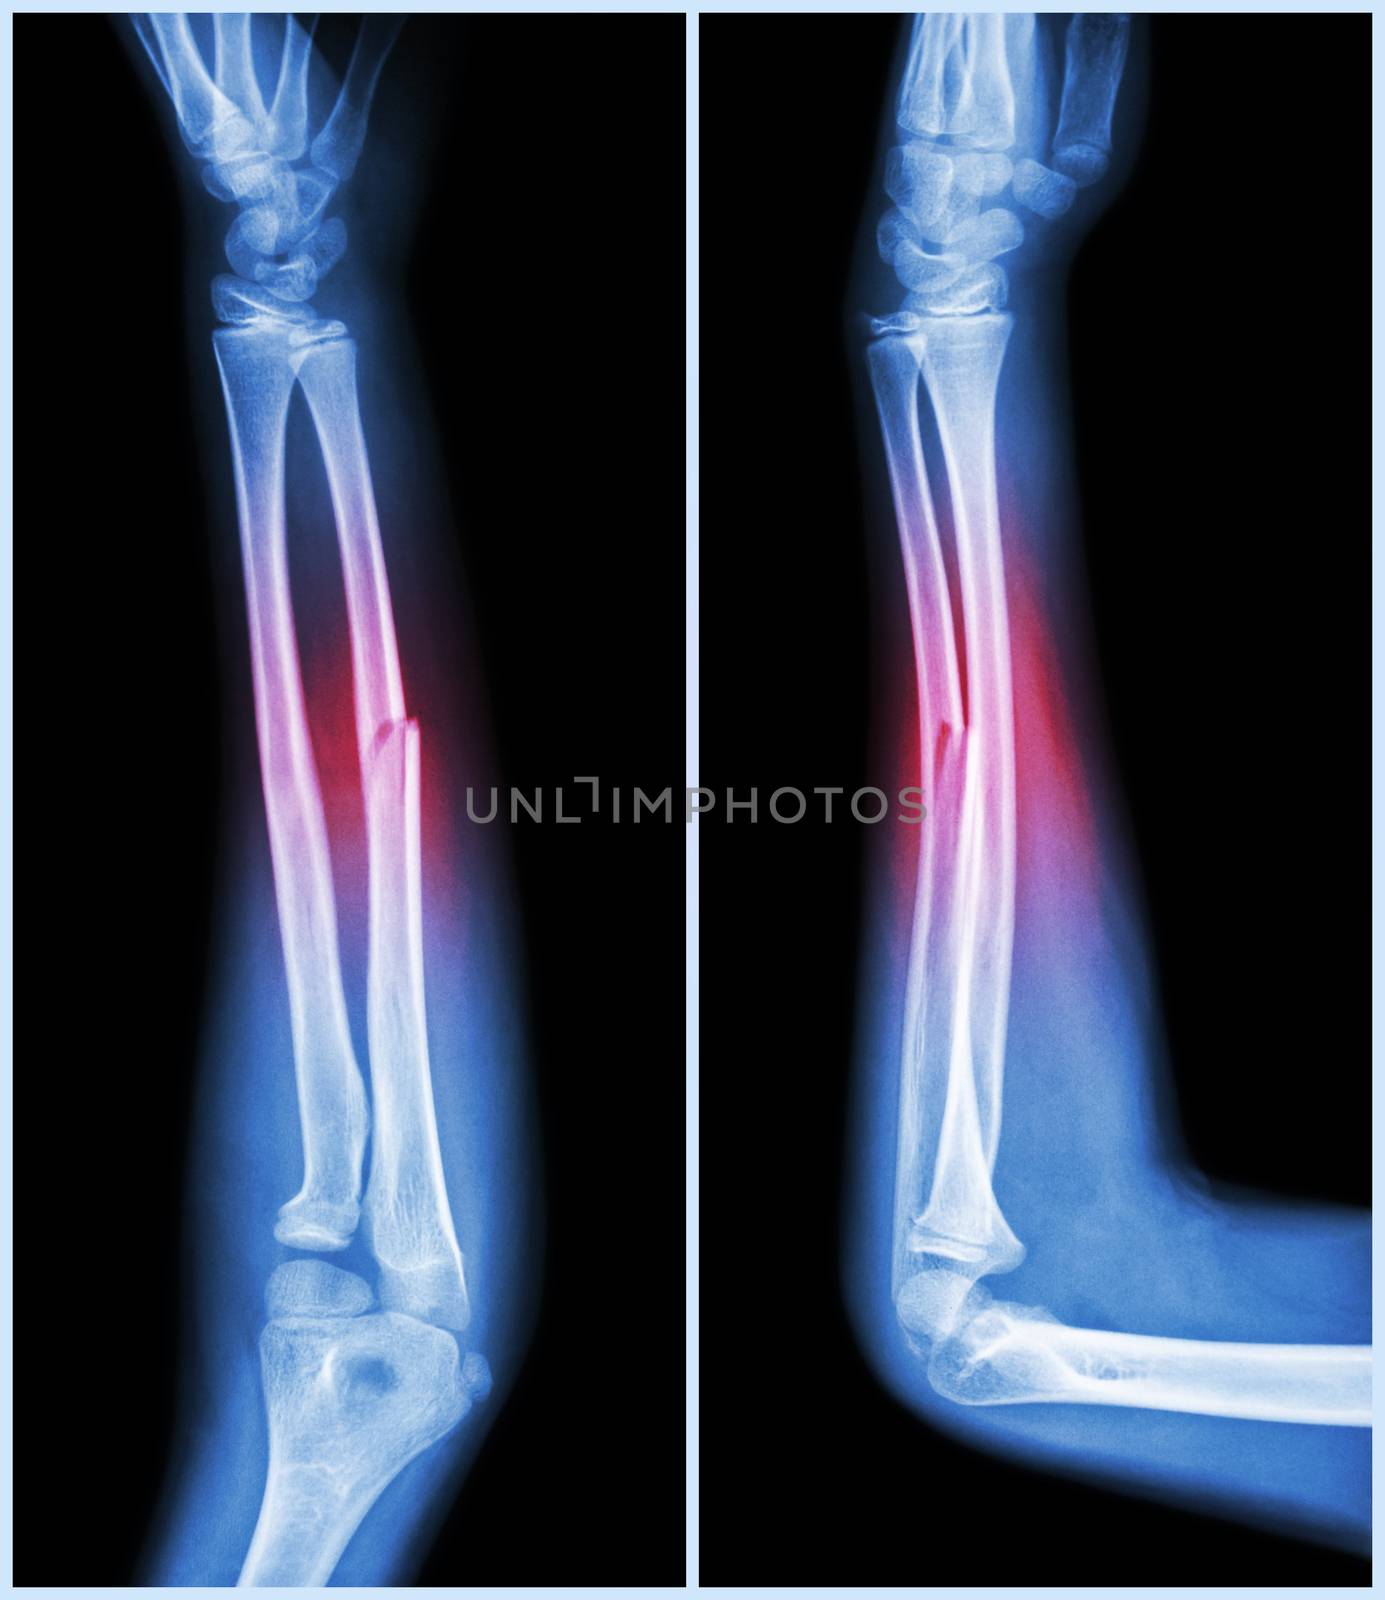 Fracture shaft of ulnar bone ( forearm bone ) : ( front and side view ) by stockdevil